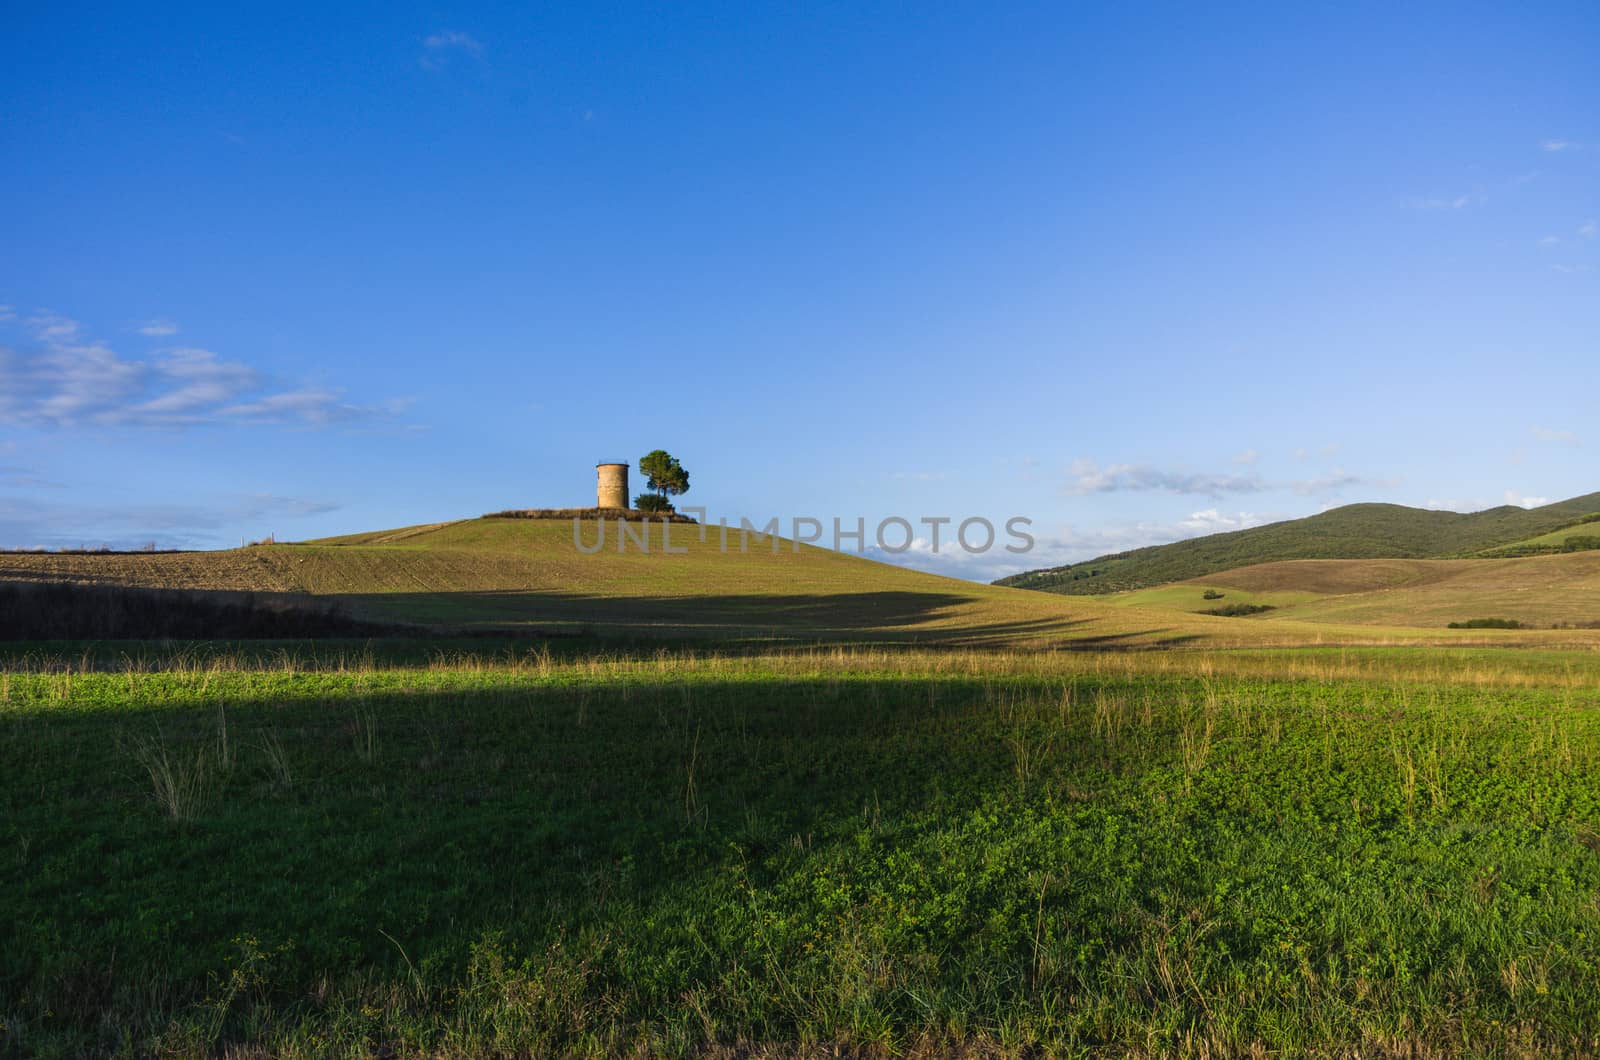 Warm afternoon in Bibbona's countryside, Tuscany